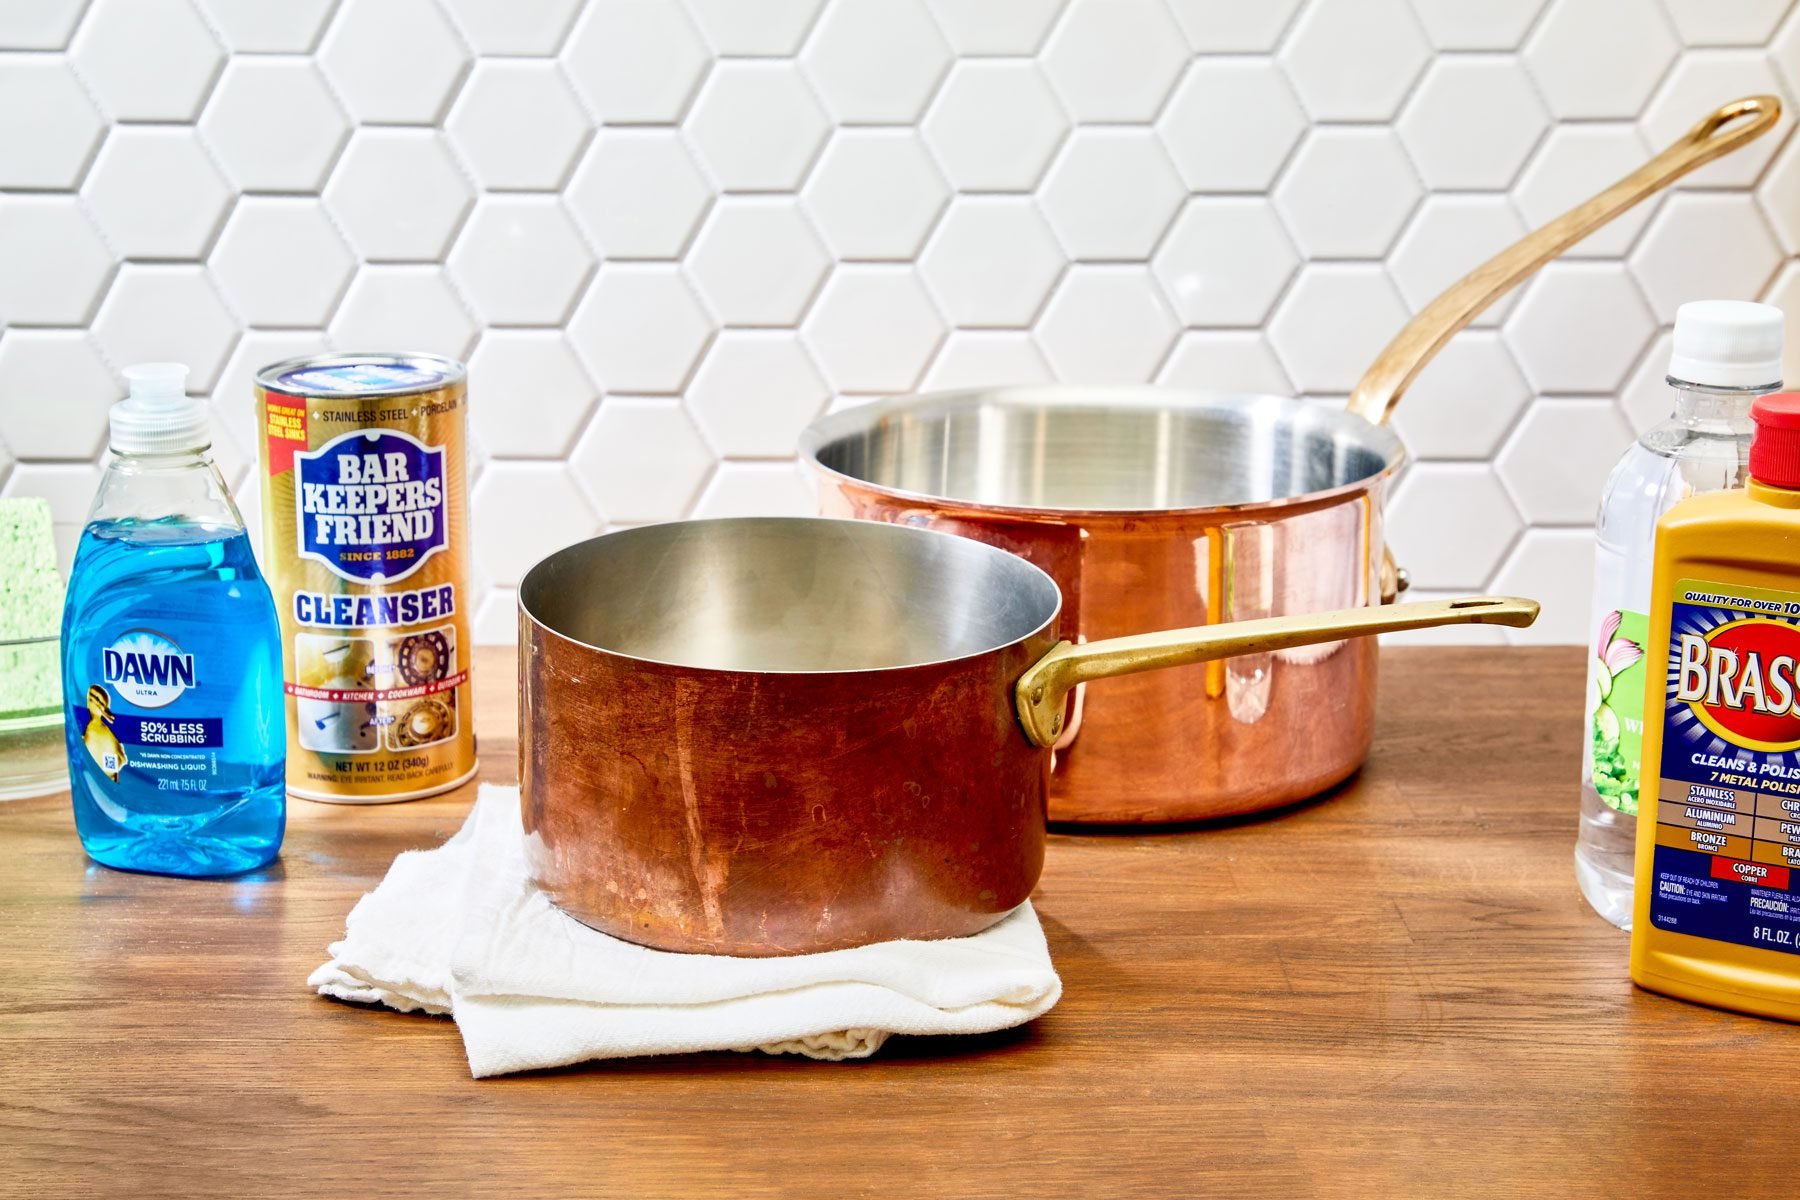 How to Clean Copper: 6 Ways to Clean Copper Pans and Sinks